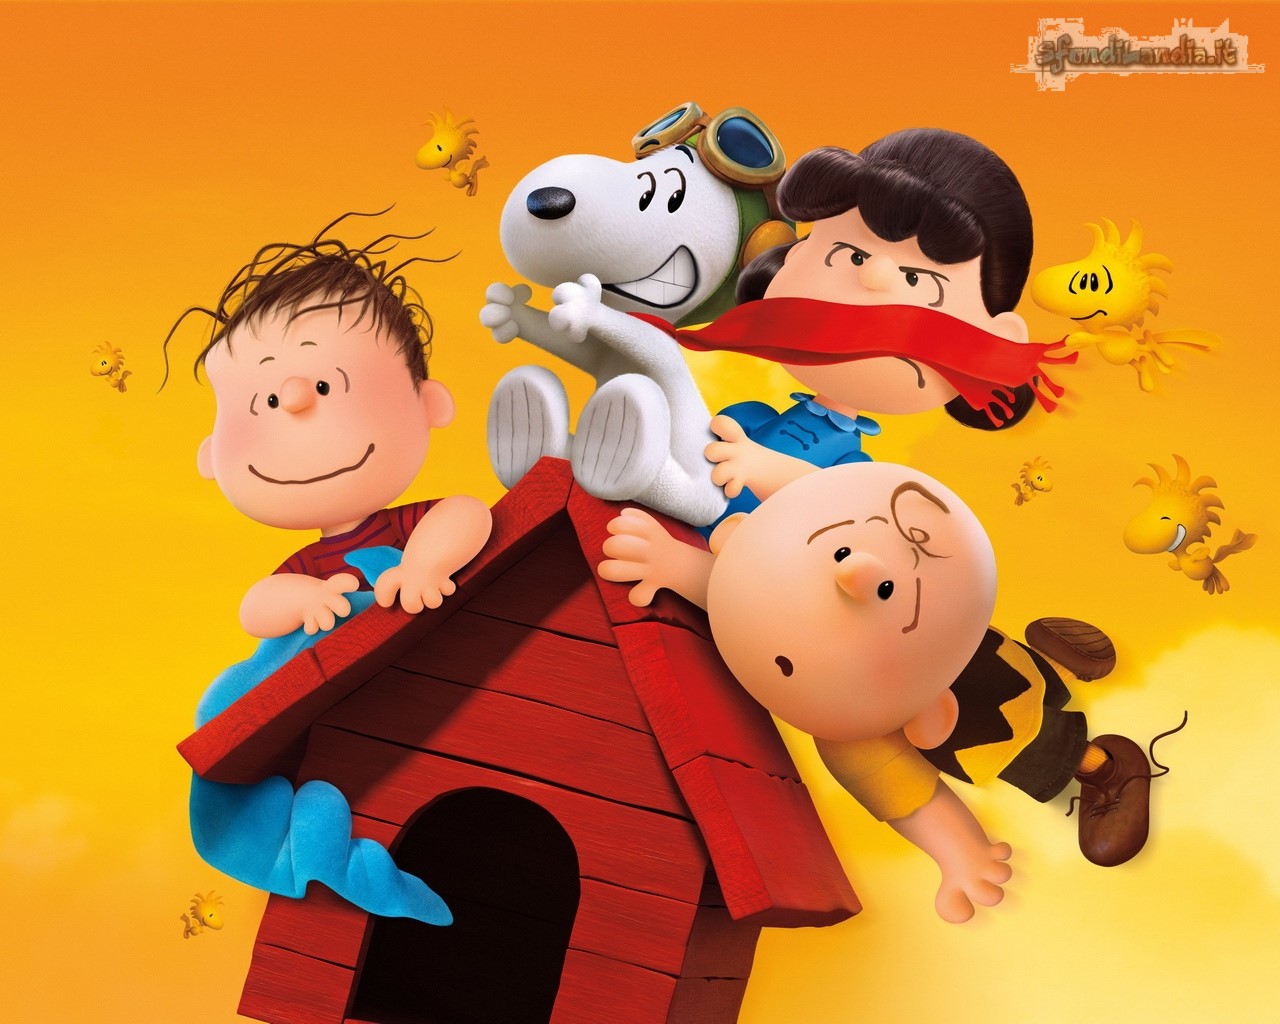 Snoopy And Friends